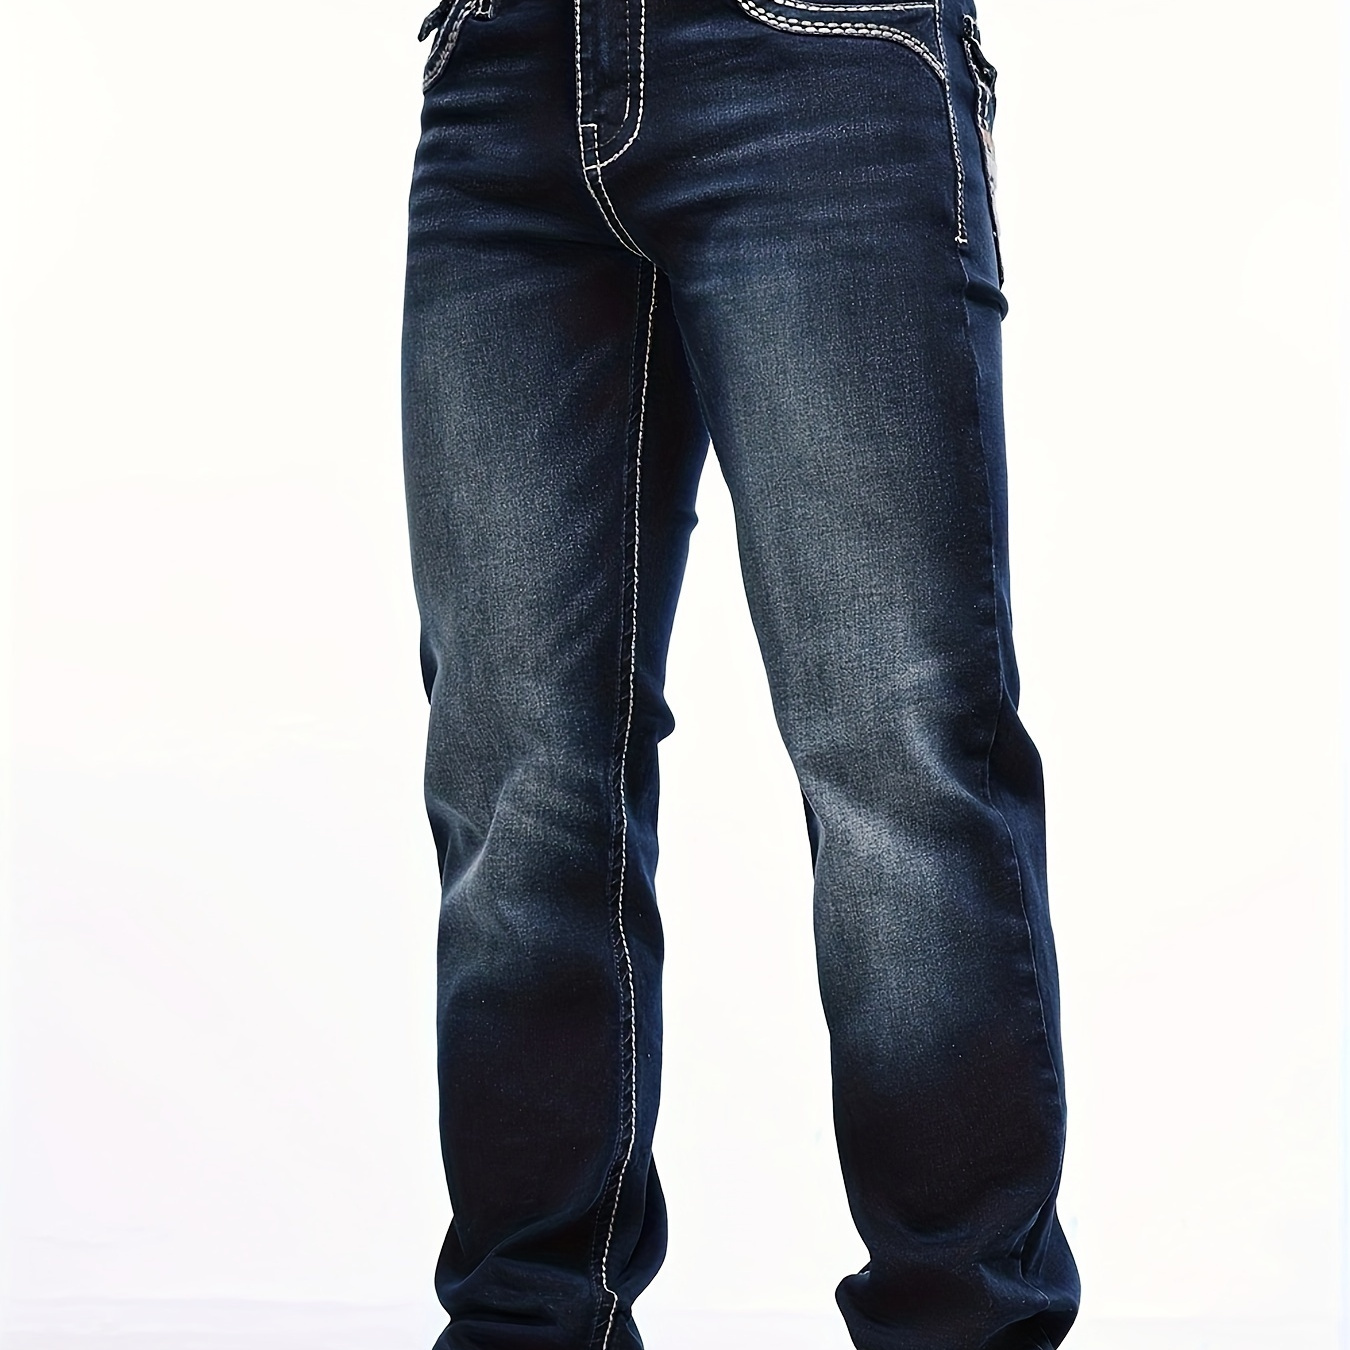 

Men's Casual Classic Jeans - Fashionable Street Style - Comfortable Fit & Durable Design - Chic Casual Wear For 4 Seasons